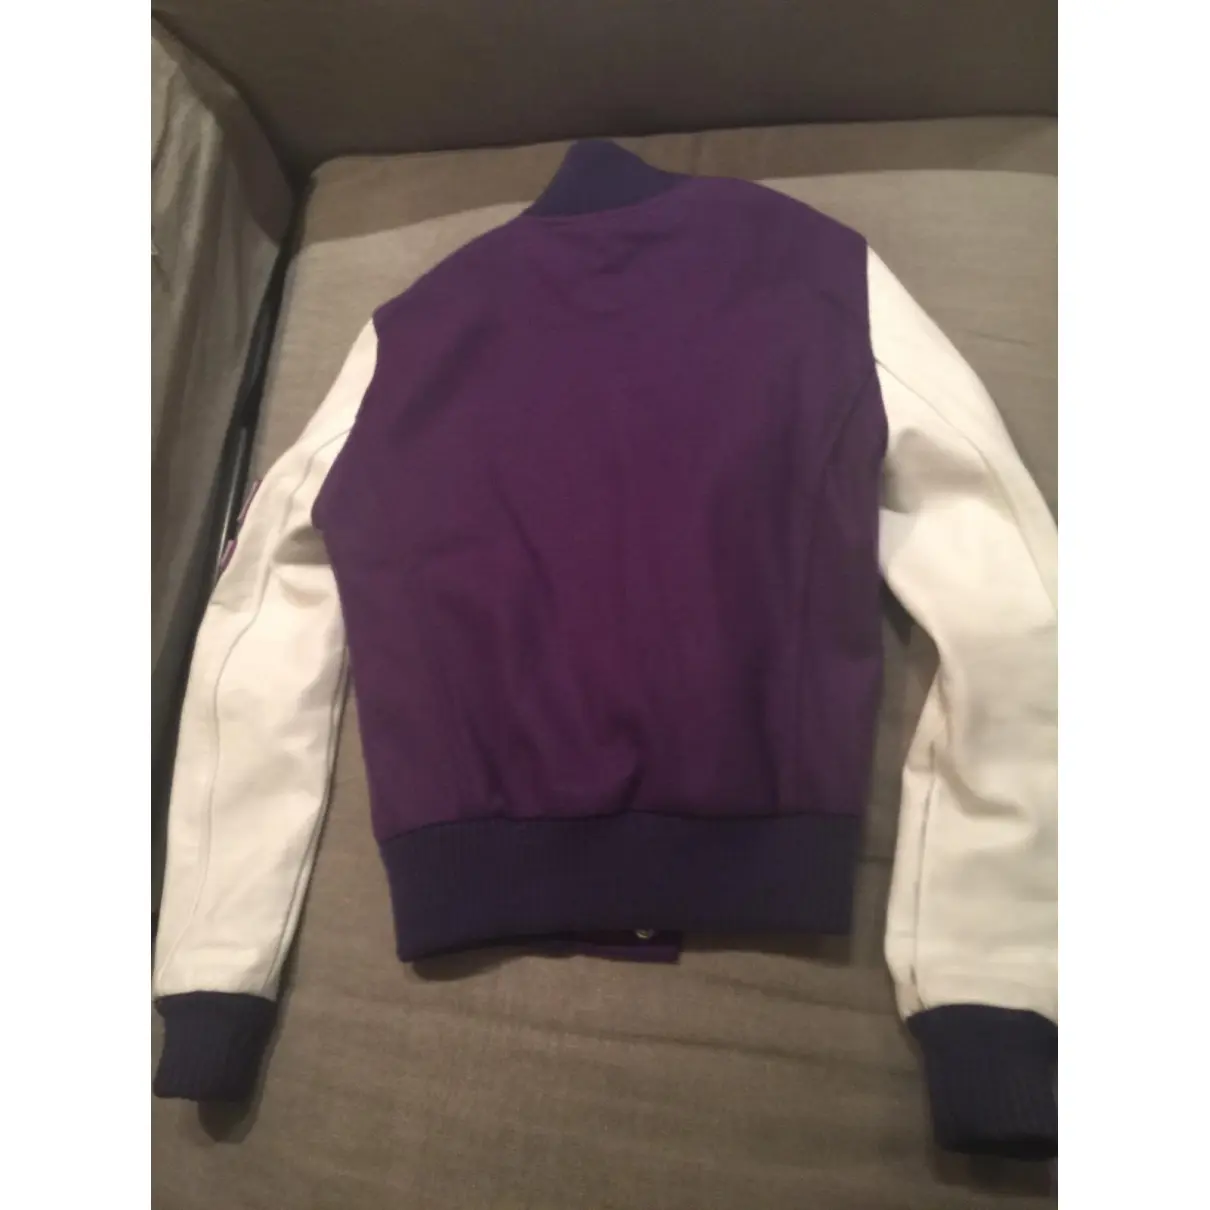 Buy American College Purple leather and wool Teddy online